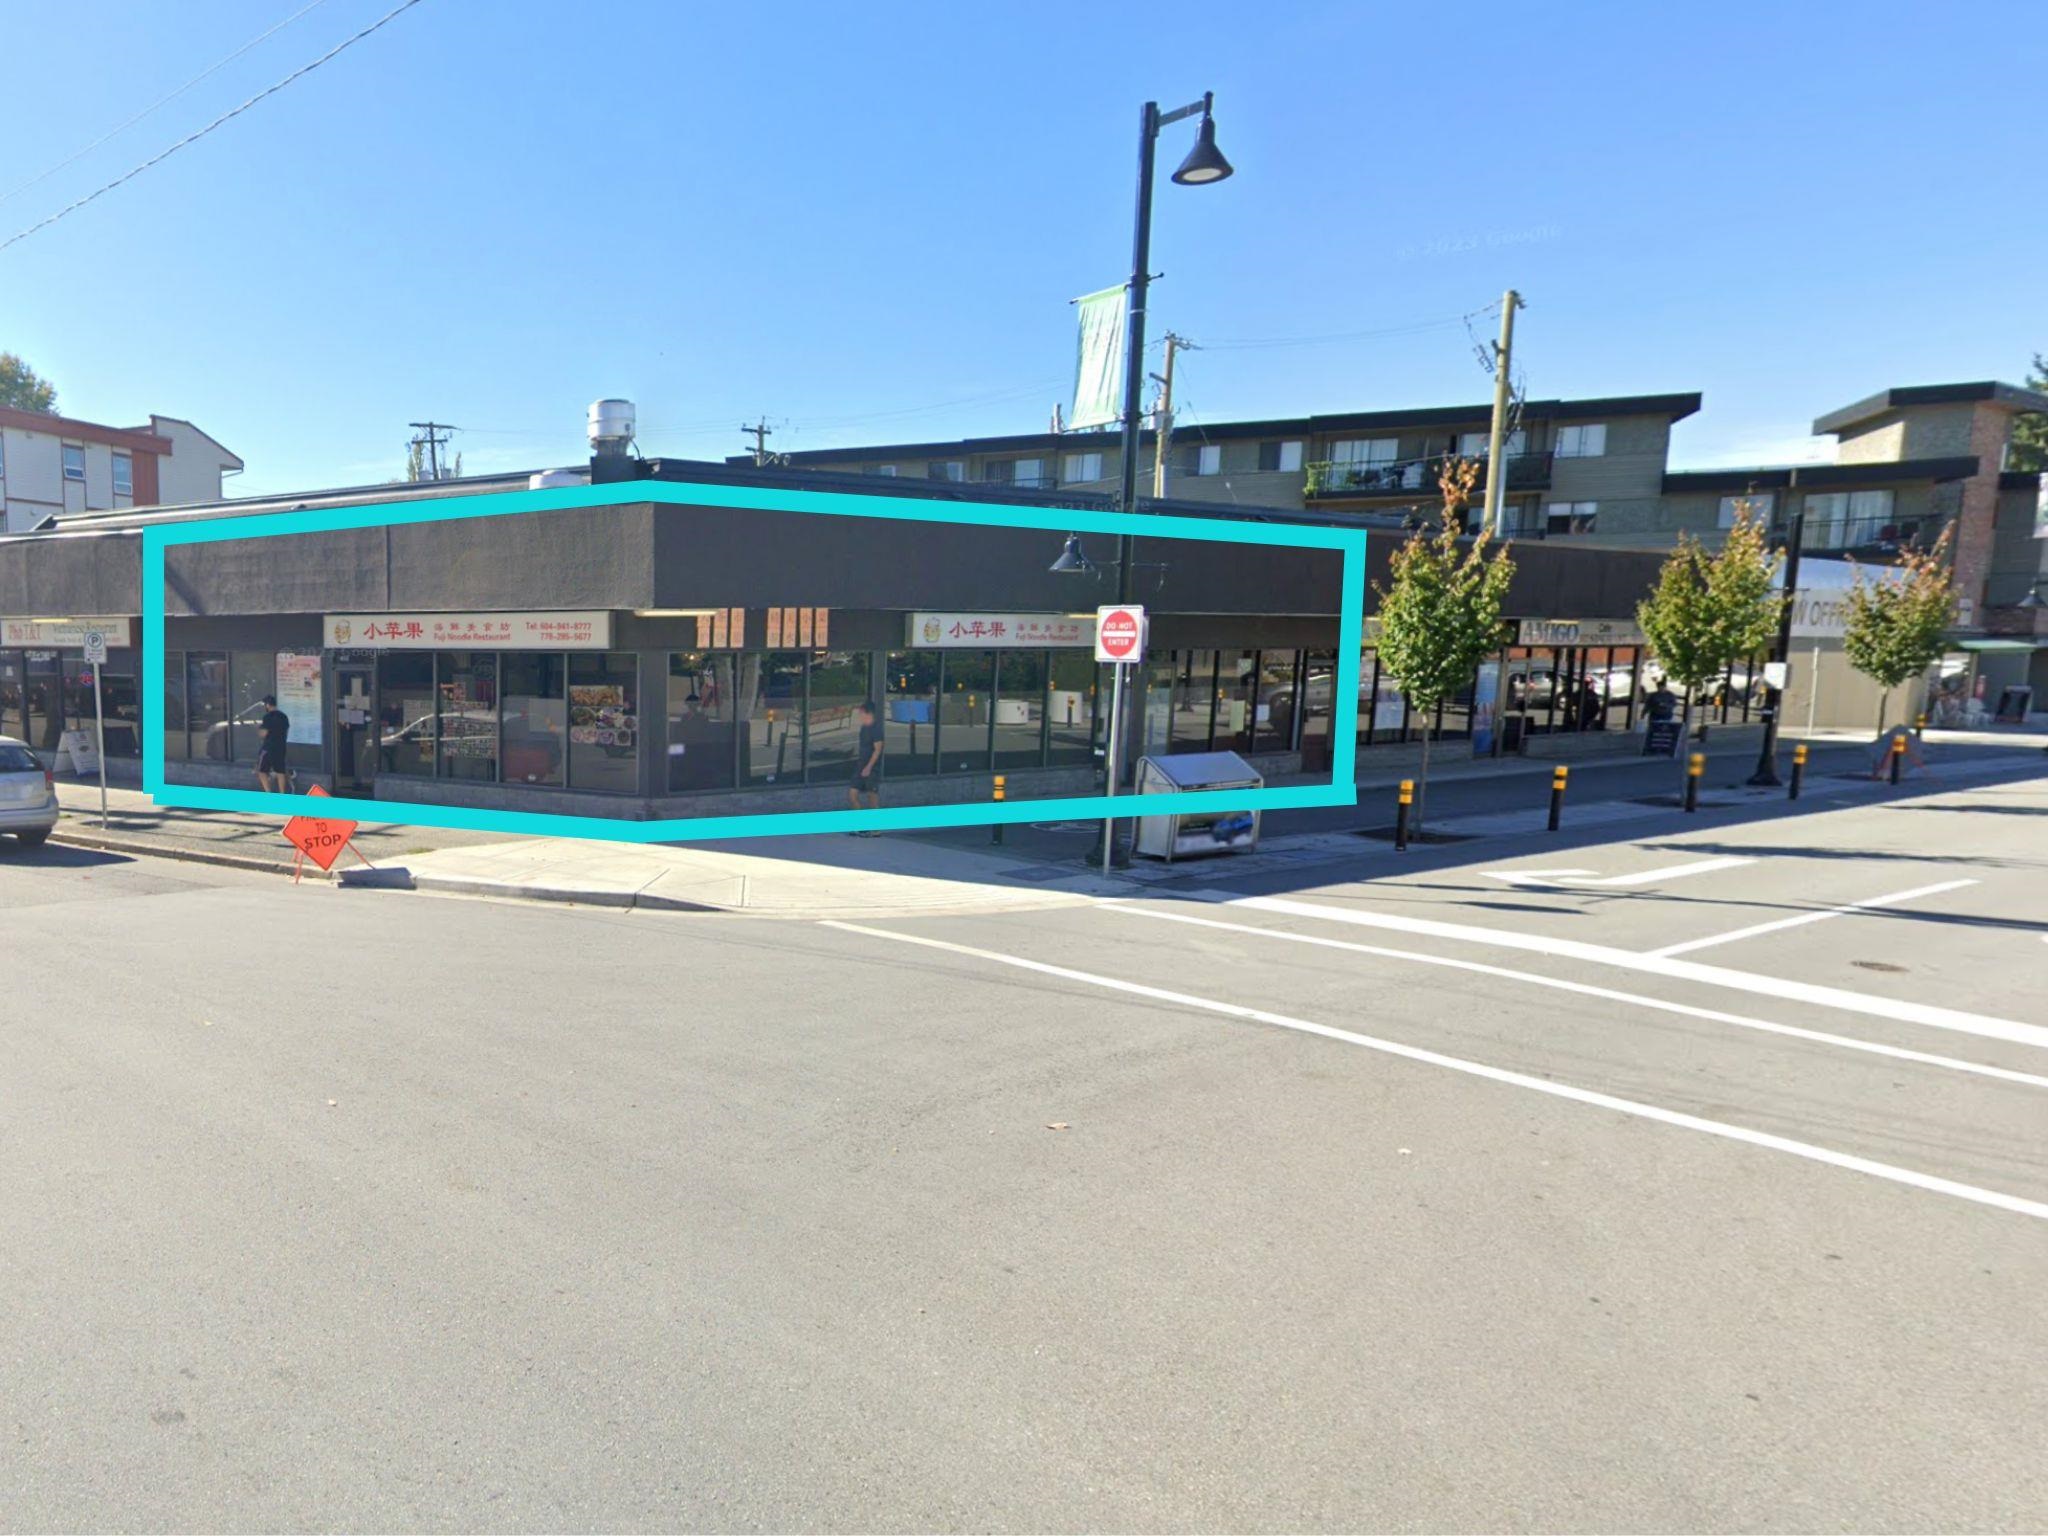 Central Pt Coquitlam Land Commercial for sale:    (Listed 6800-05-04)